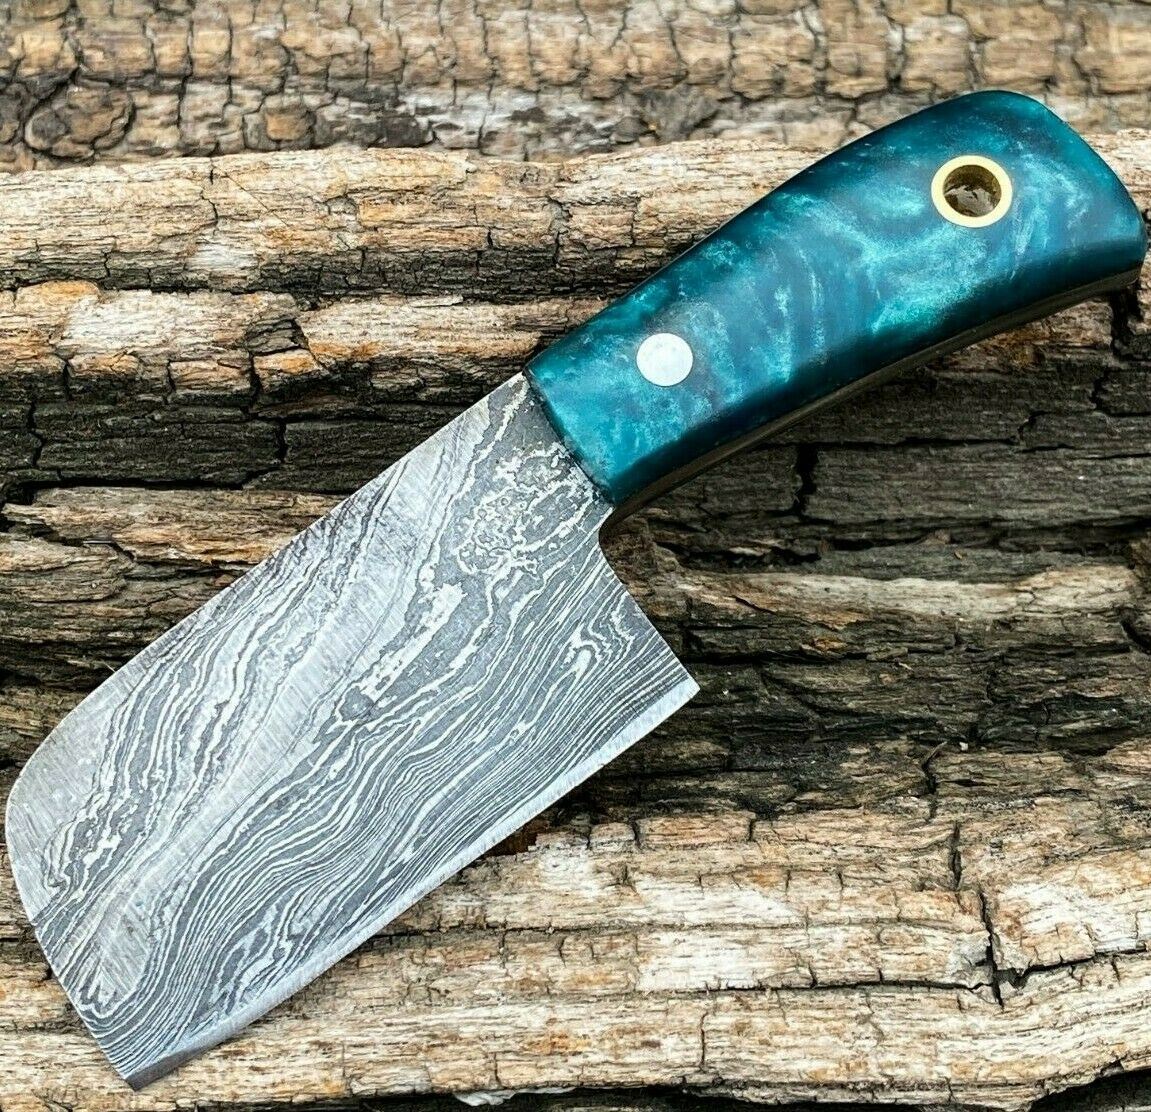 HAND FORGED DAMASCUS Steel Mini Neck Cleaver Knife with Sheath W/ Resin Handle